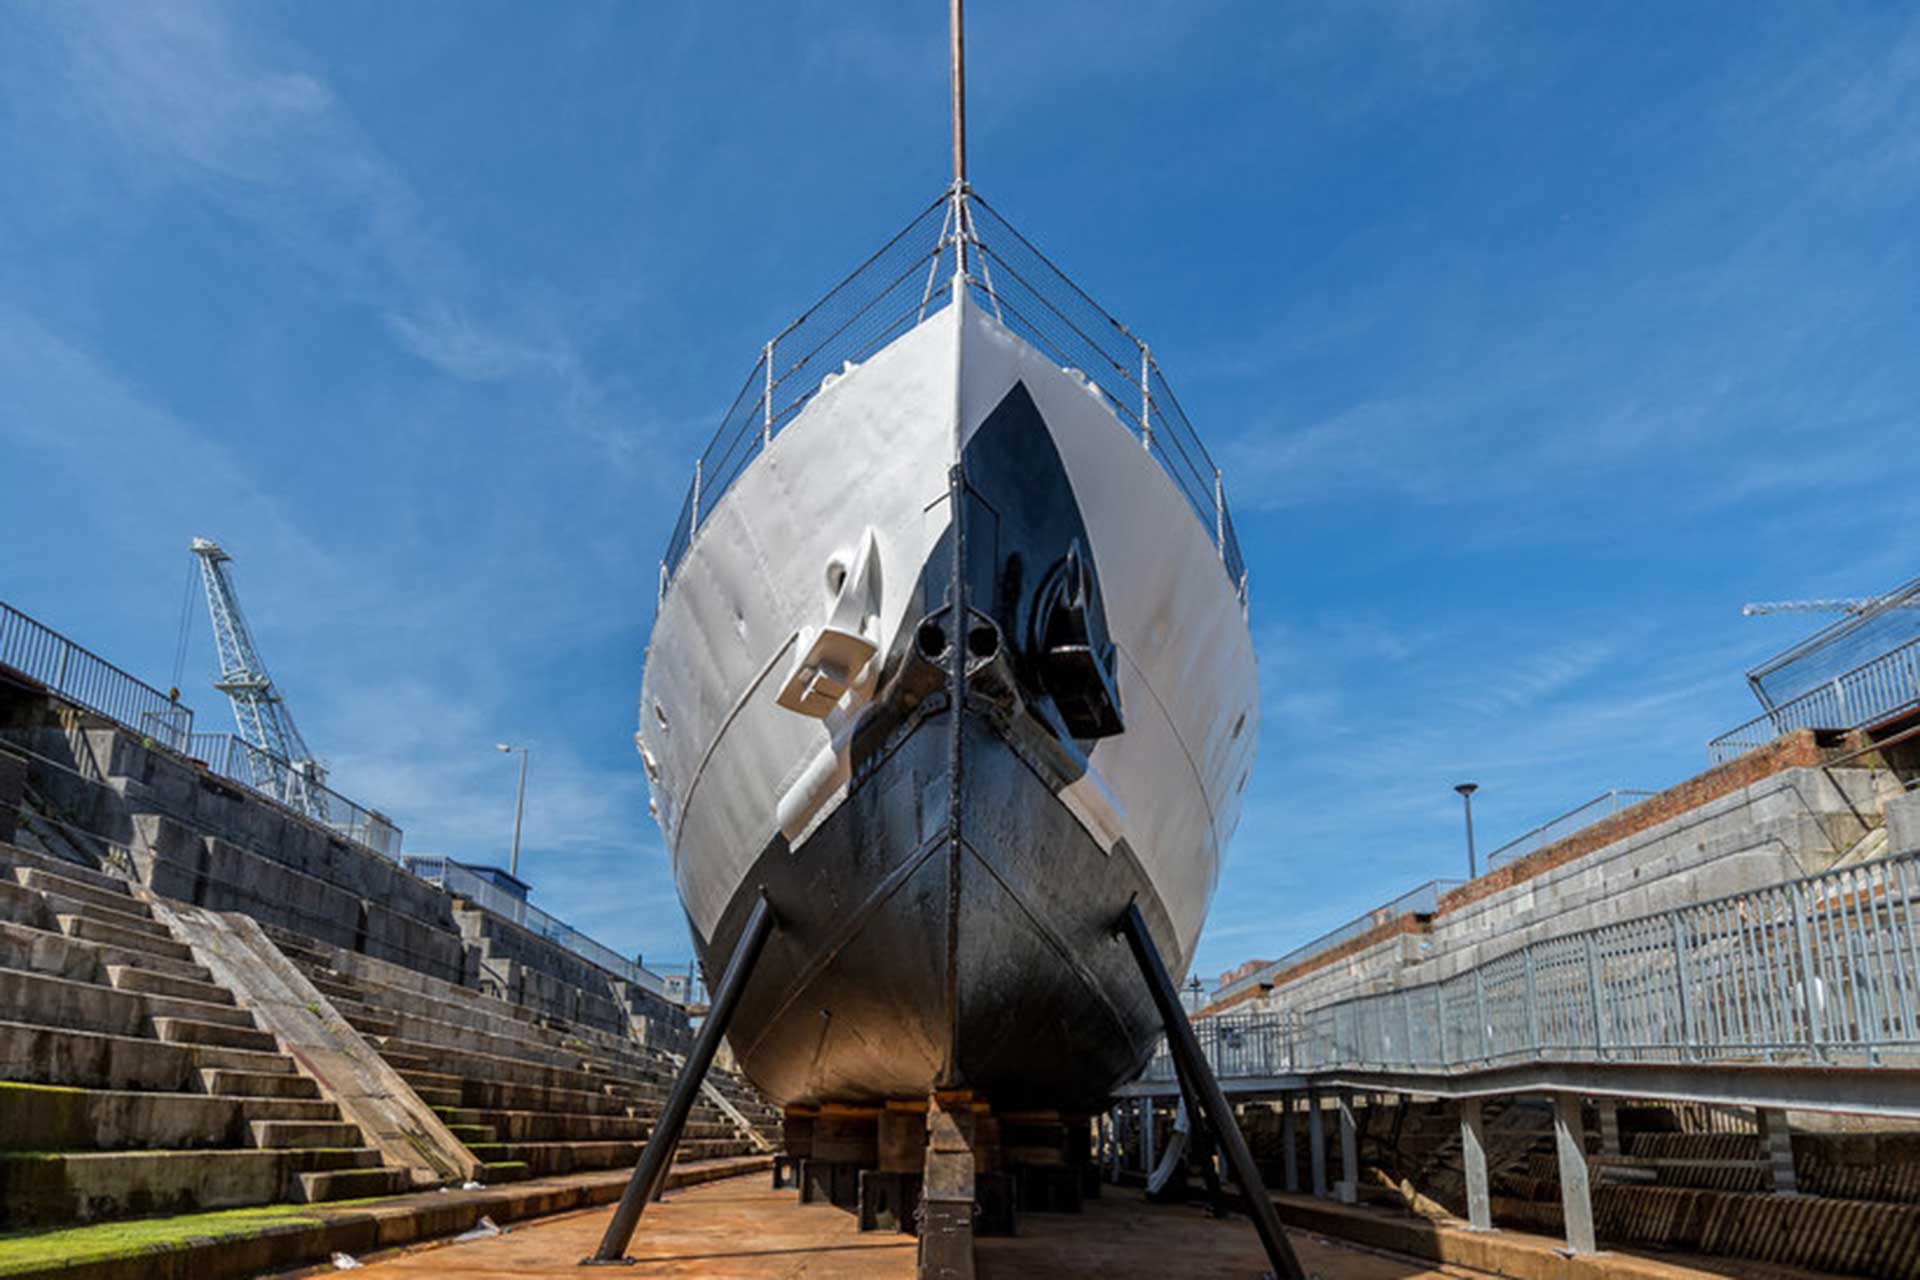 Bow view of HMS M.33 in dry dock at Portsmouth Historic Dockyard